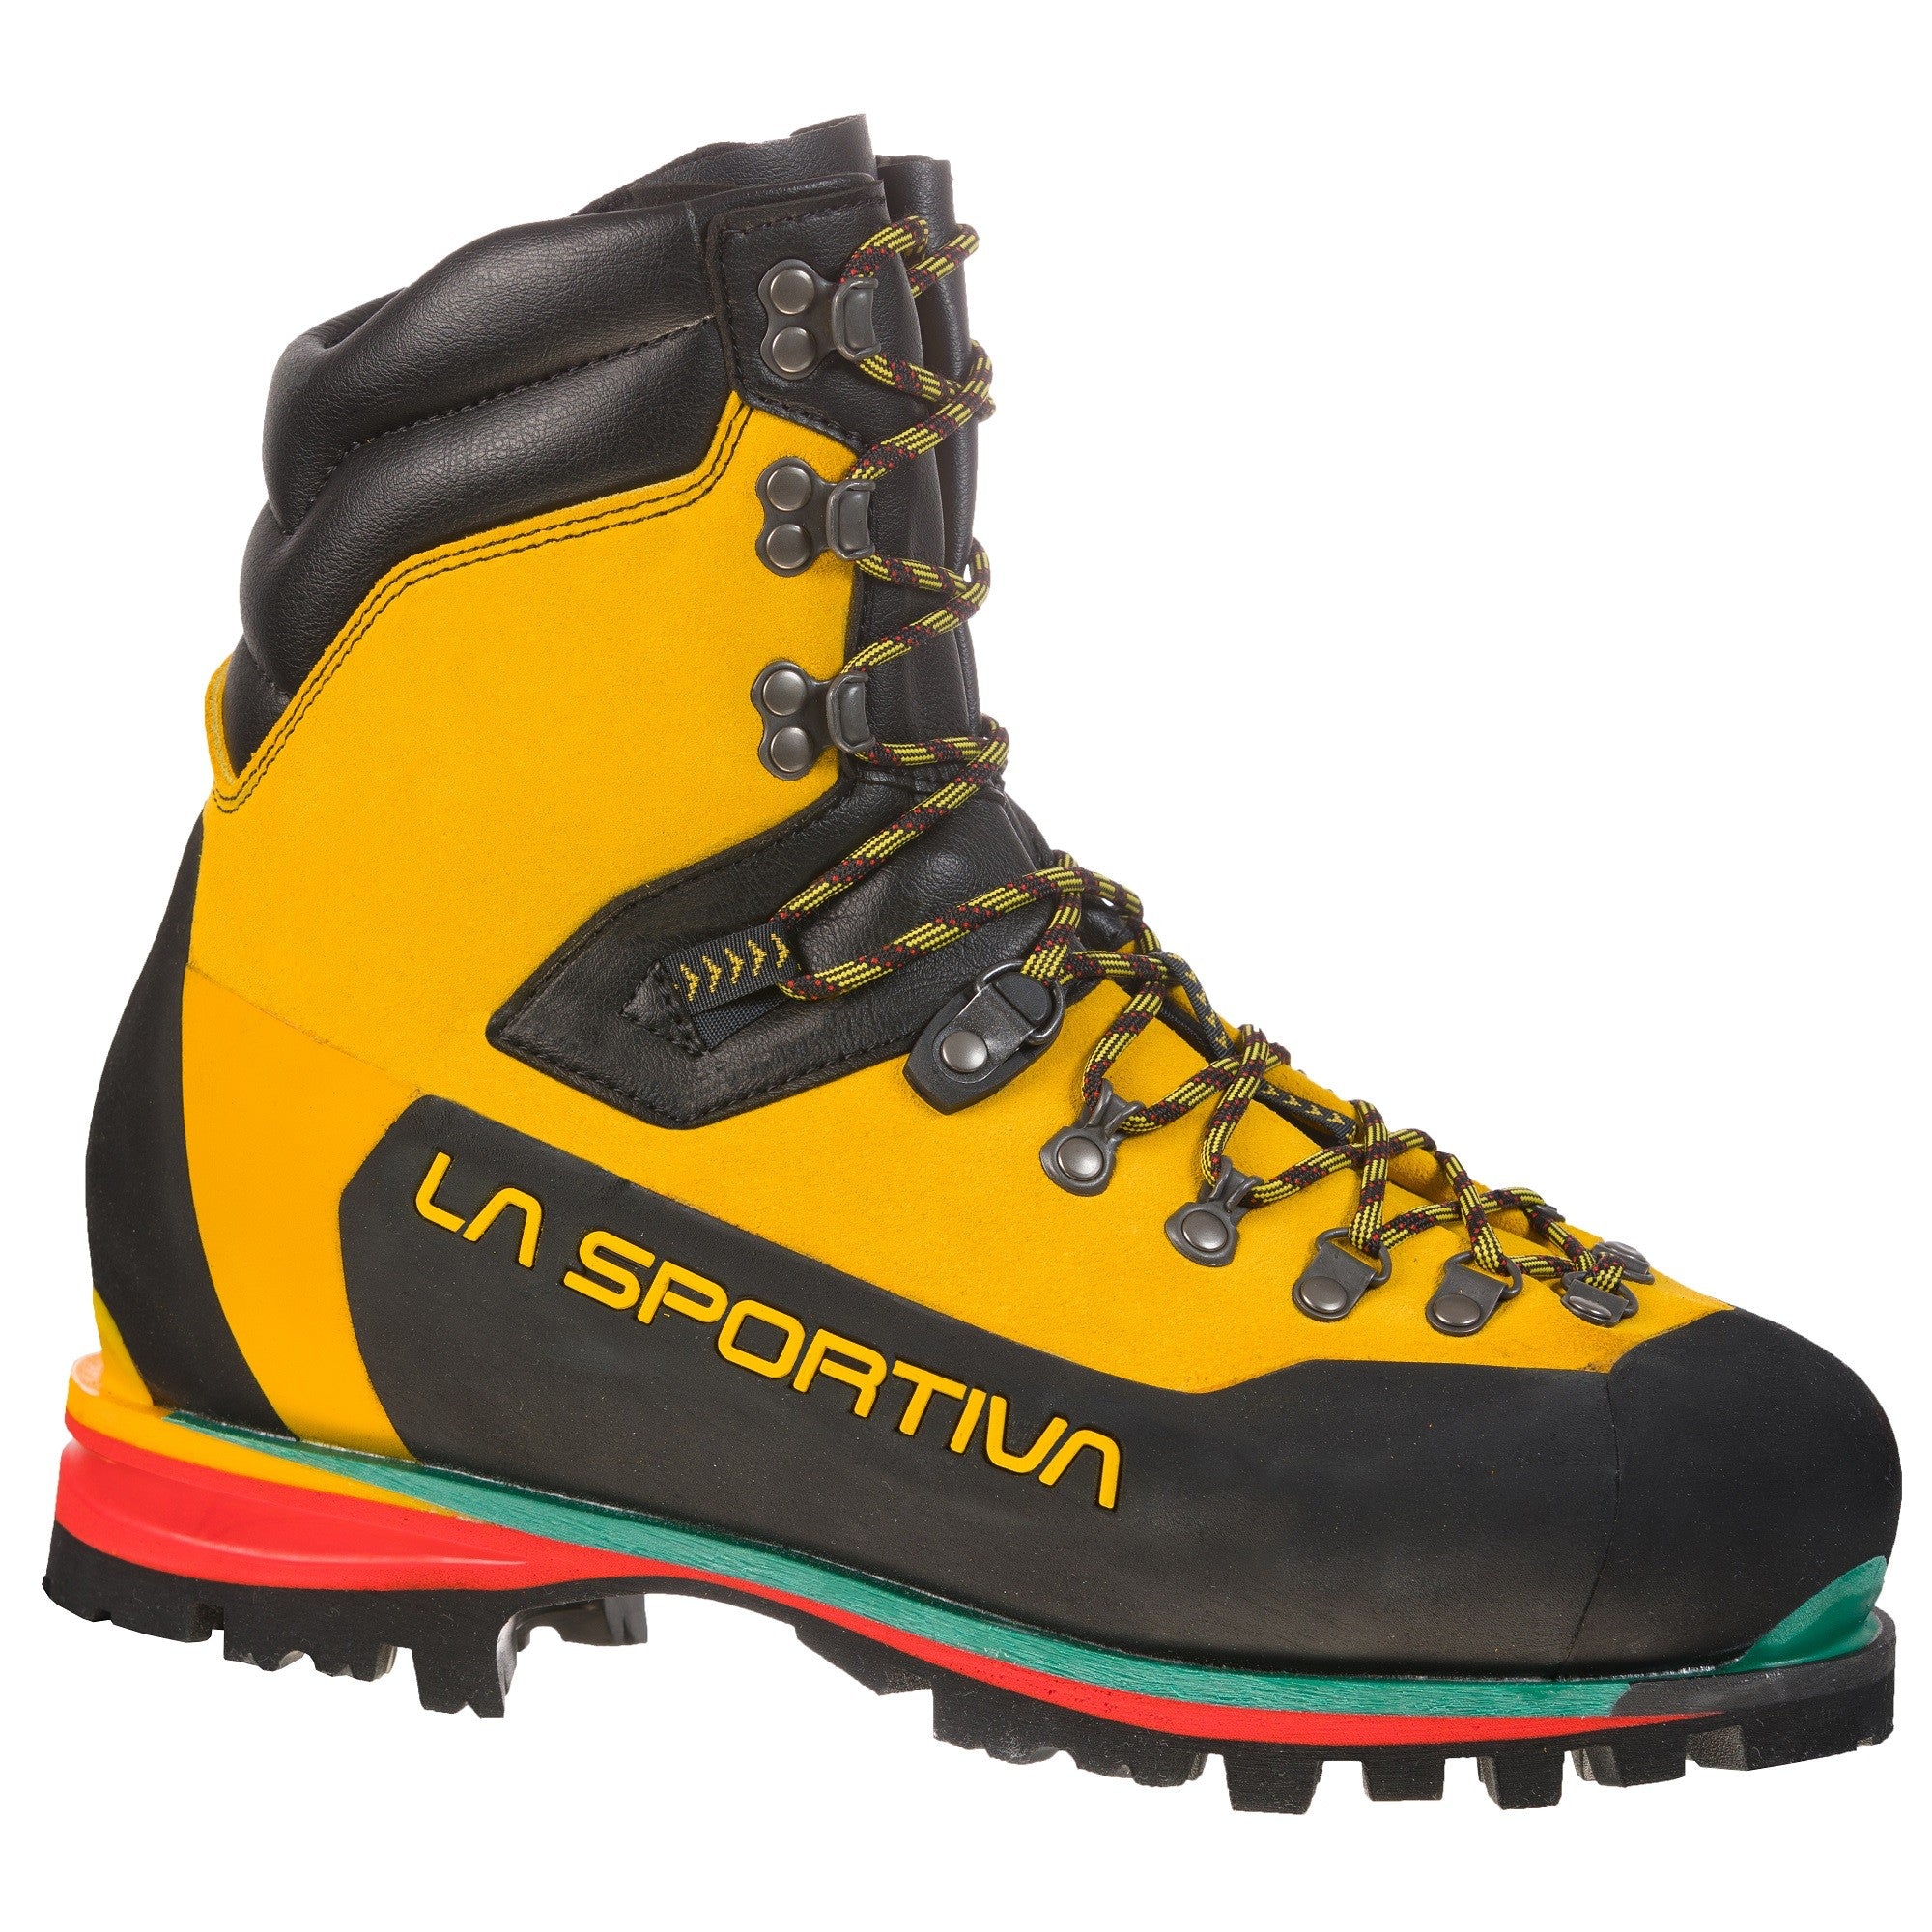 Side of La Sportiva Nepal Extreme in Black & Yellow